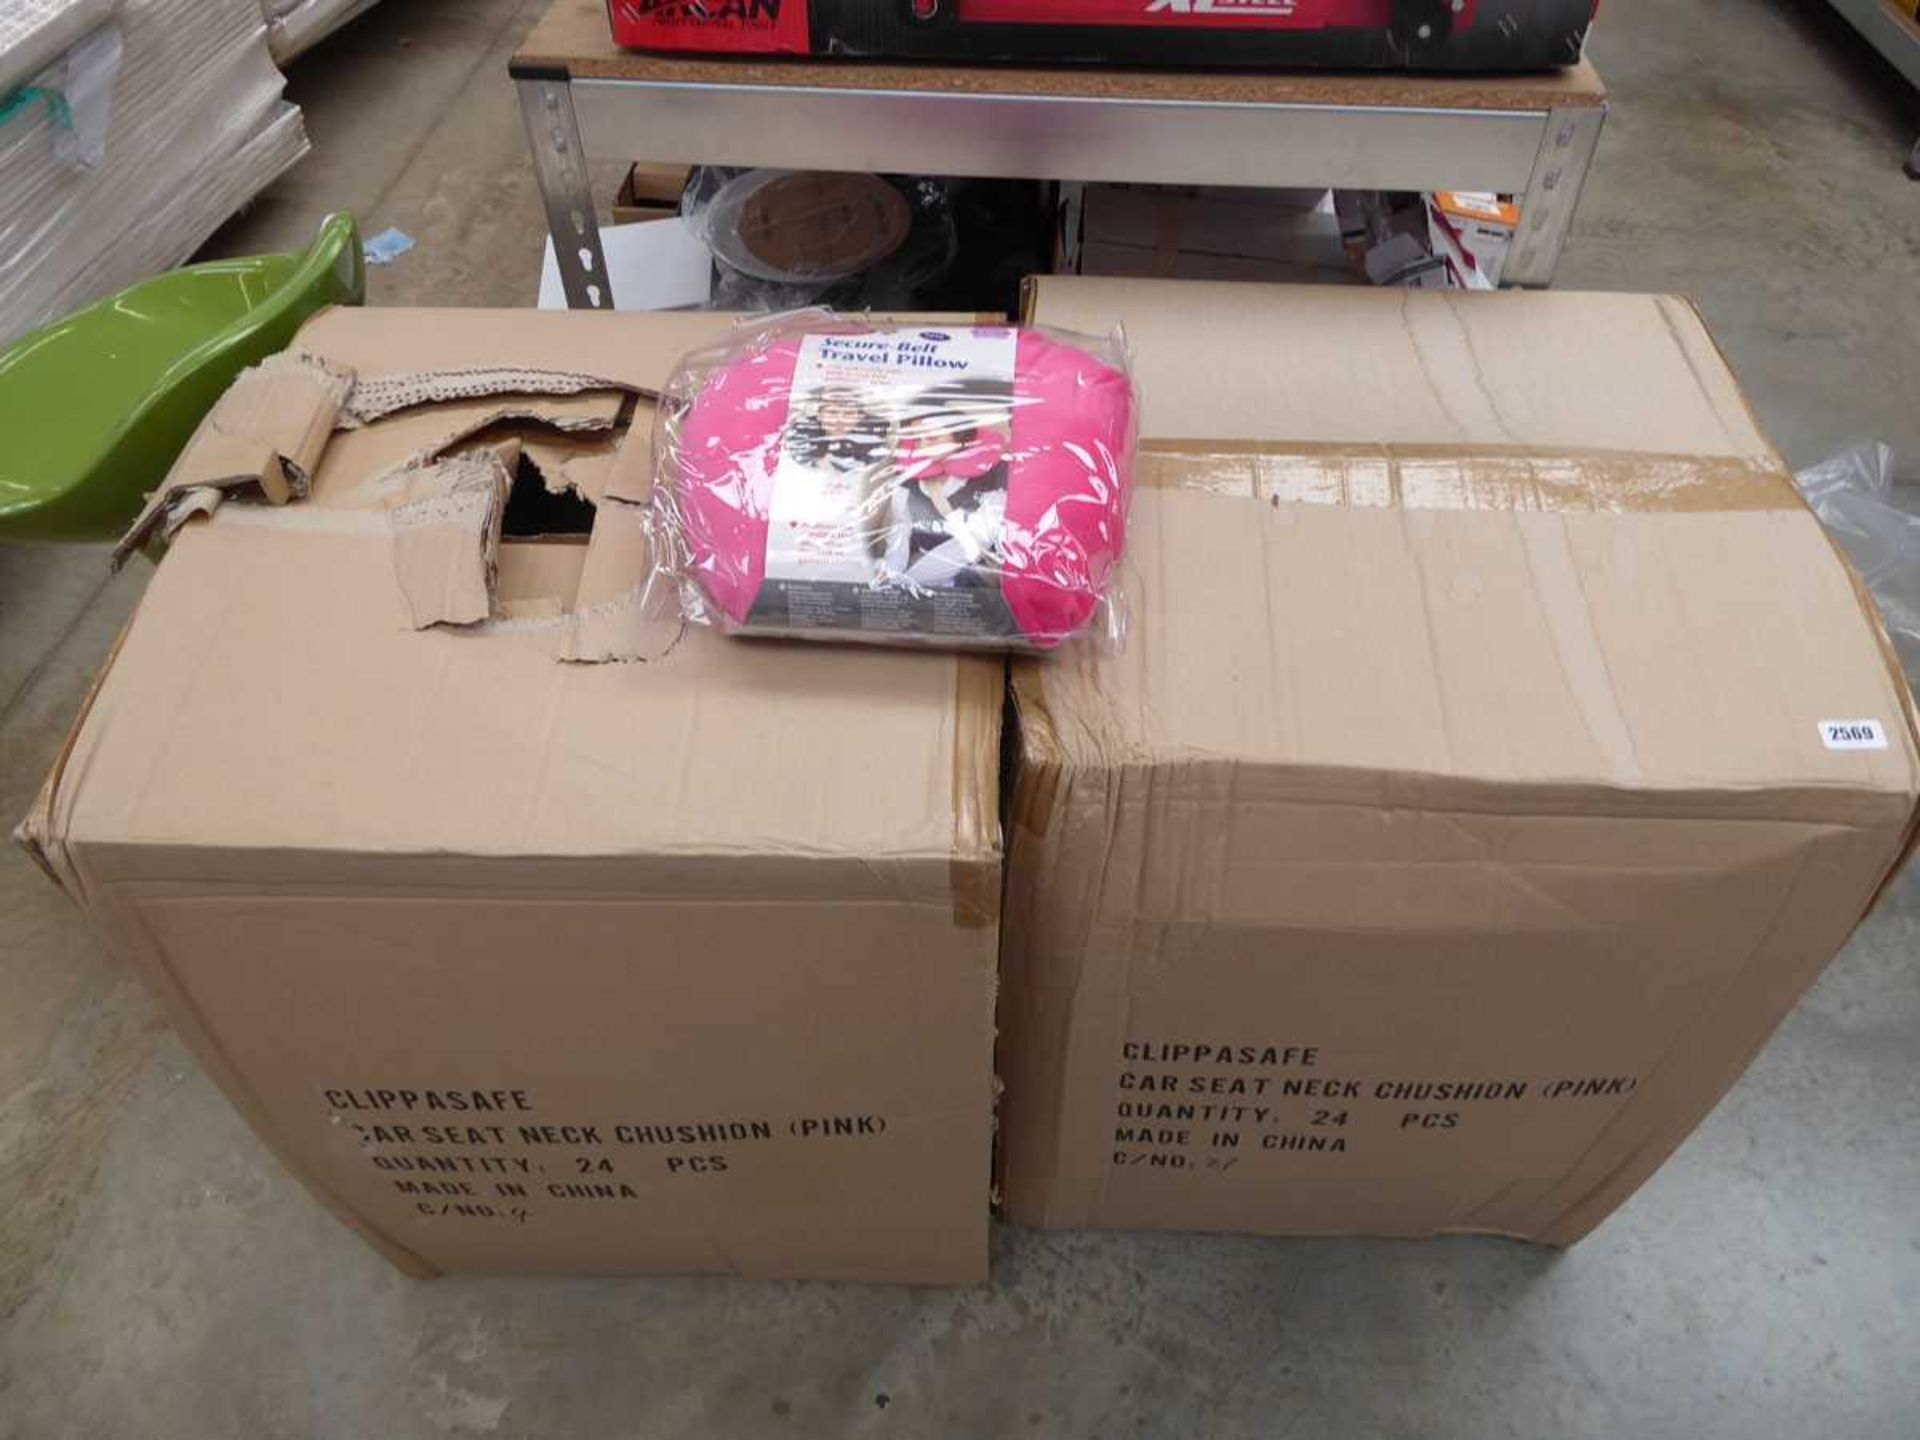 2 boxes containing approx. 24 piece each of pink car seat neck cushions